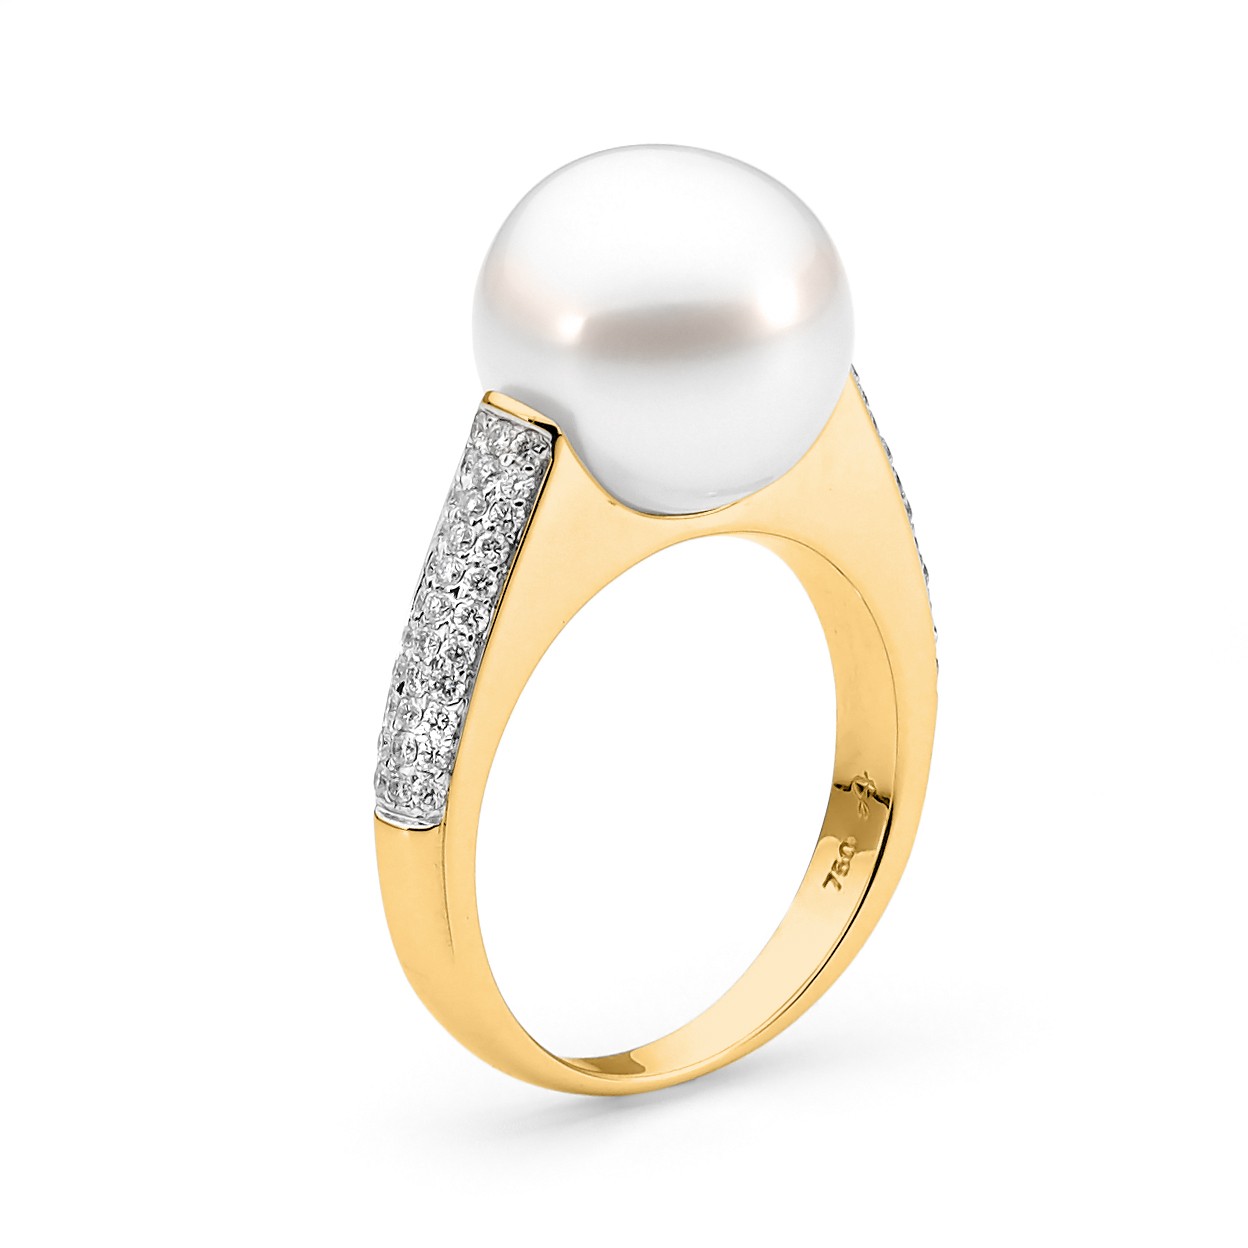 Pave Set Diamond and Pearl Ring - Allure South Sea Pearls